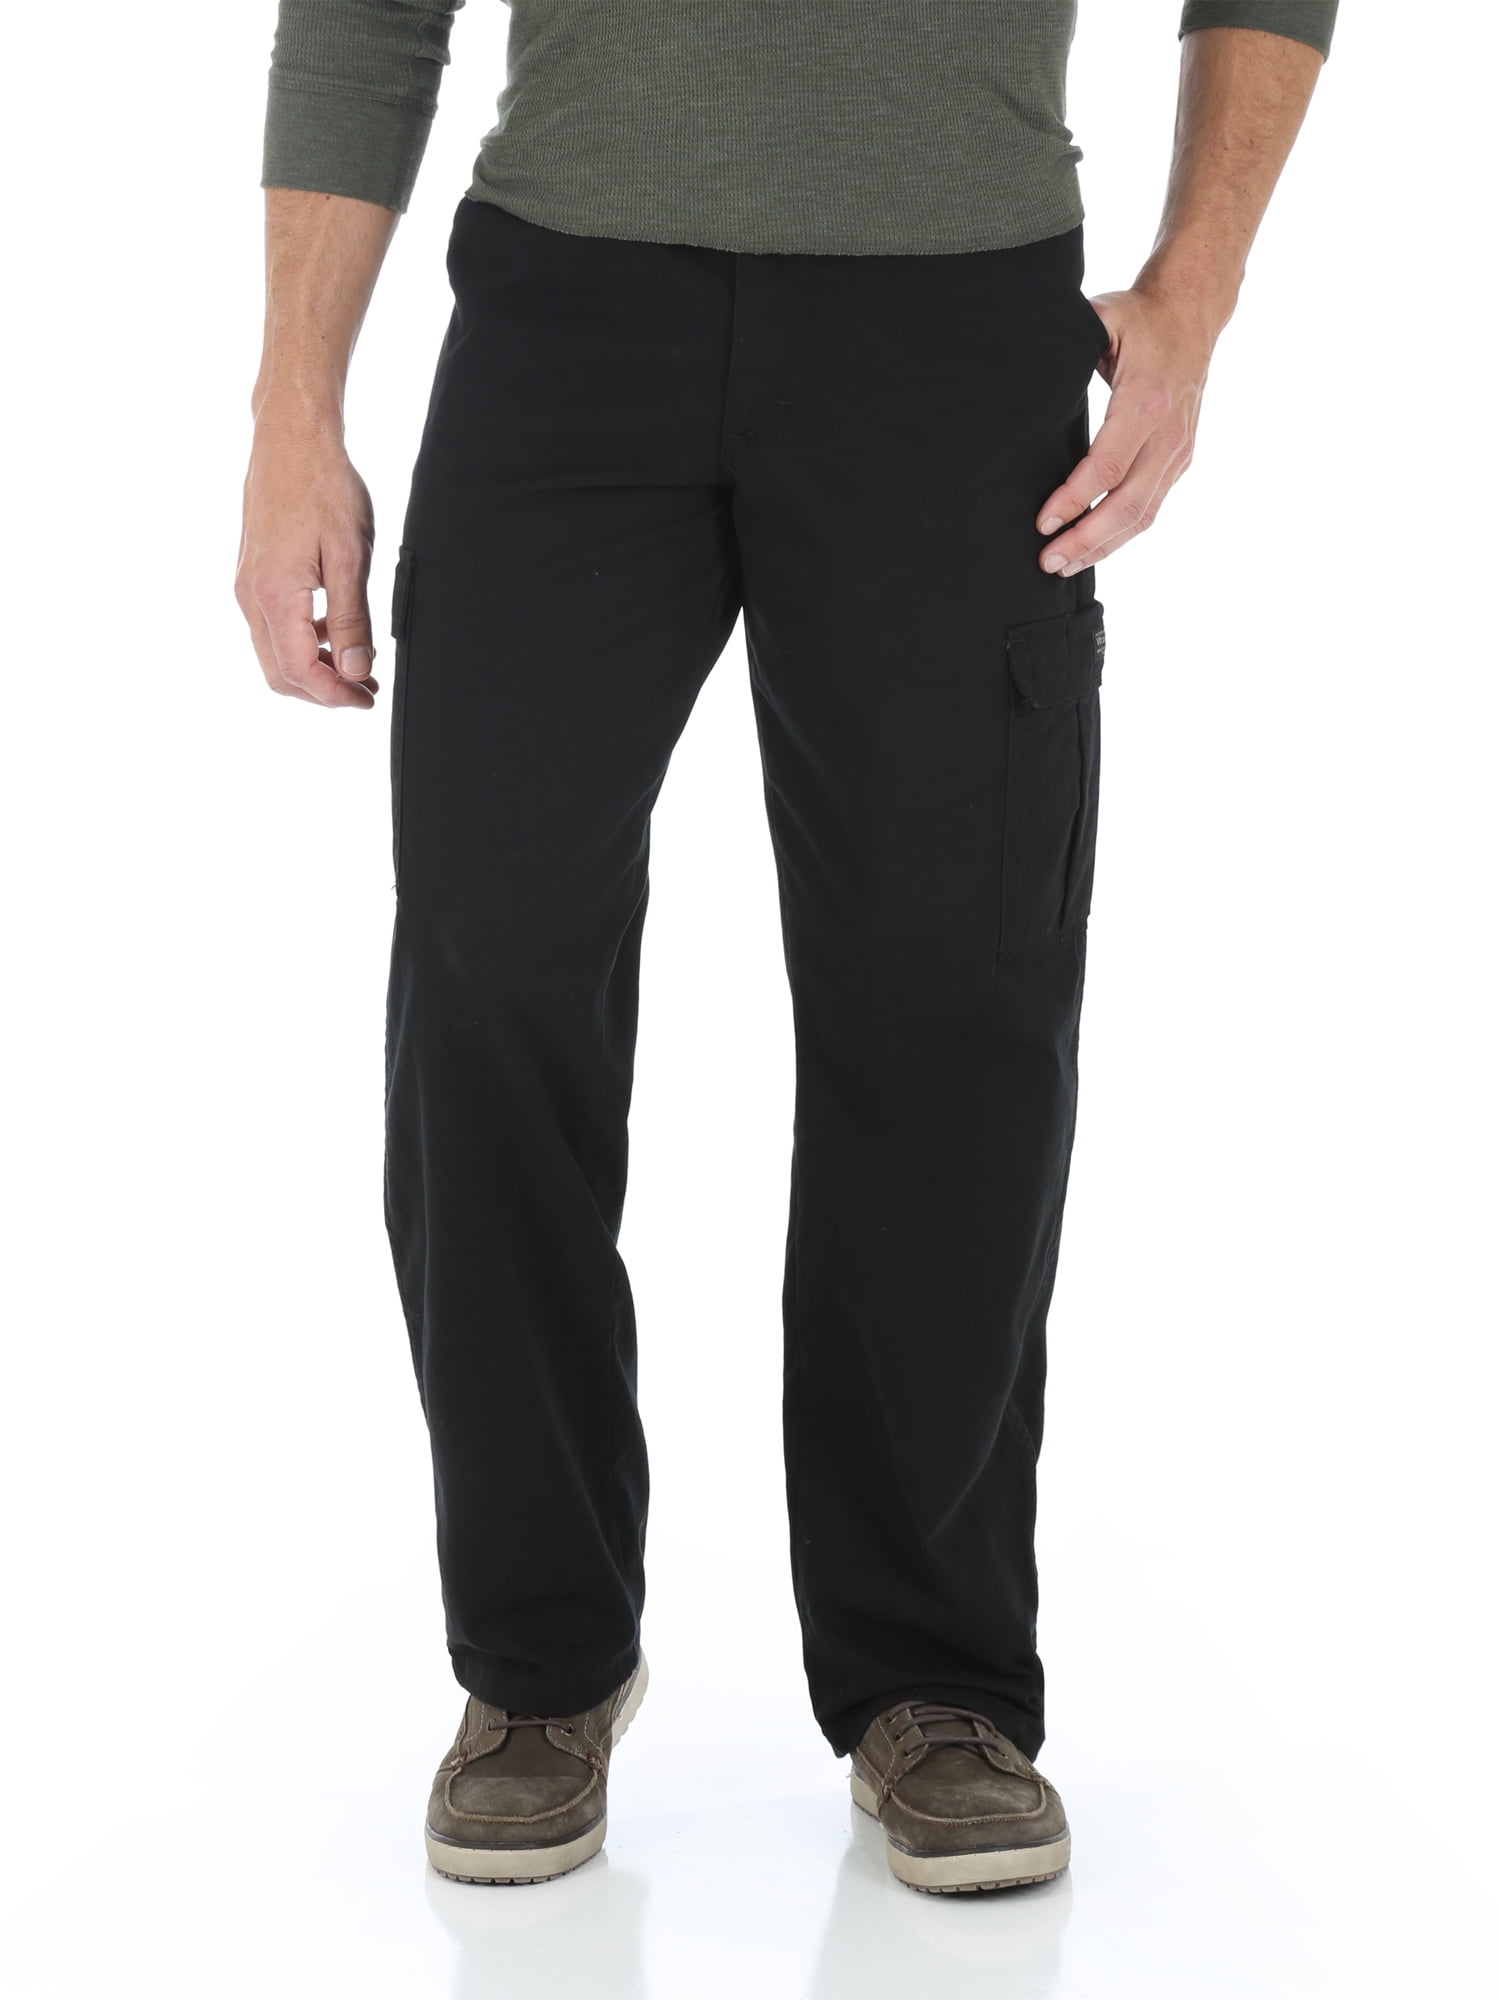 Wrangler Men's and Big Men's Relaxed Fit Legacy Cargo Pant 